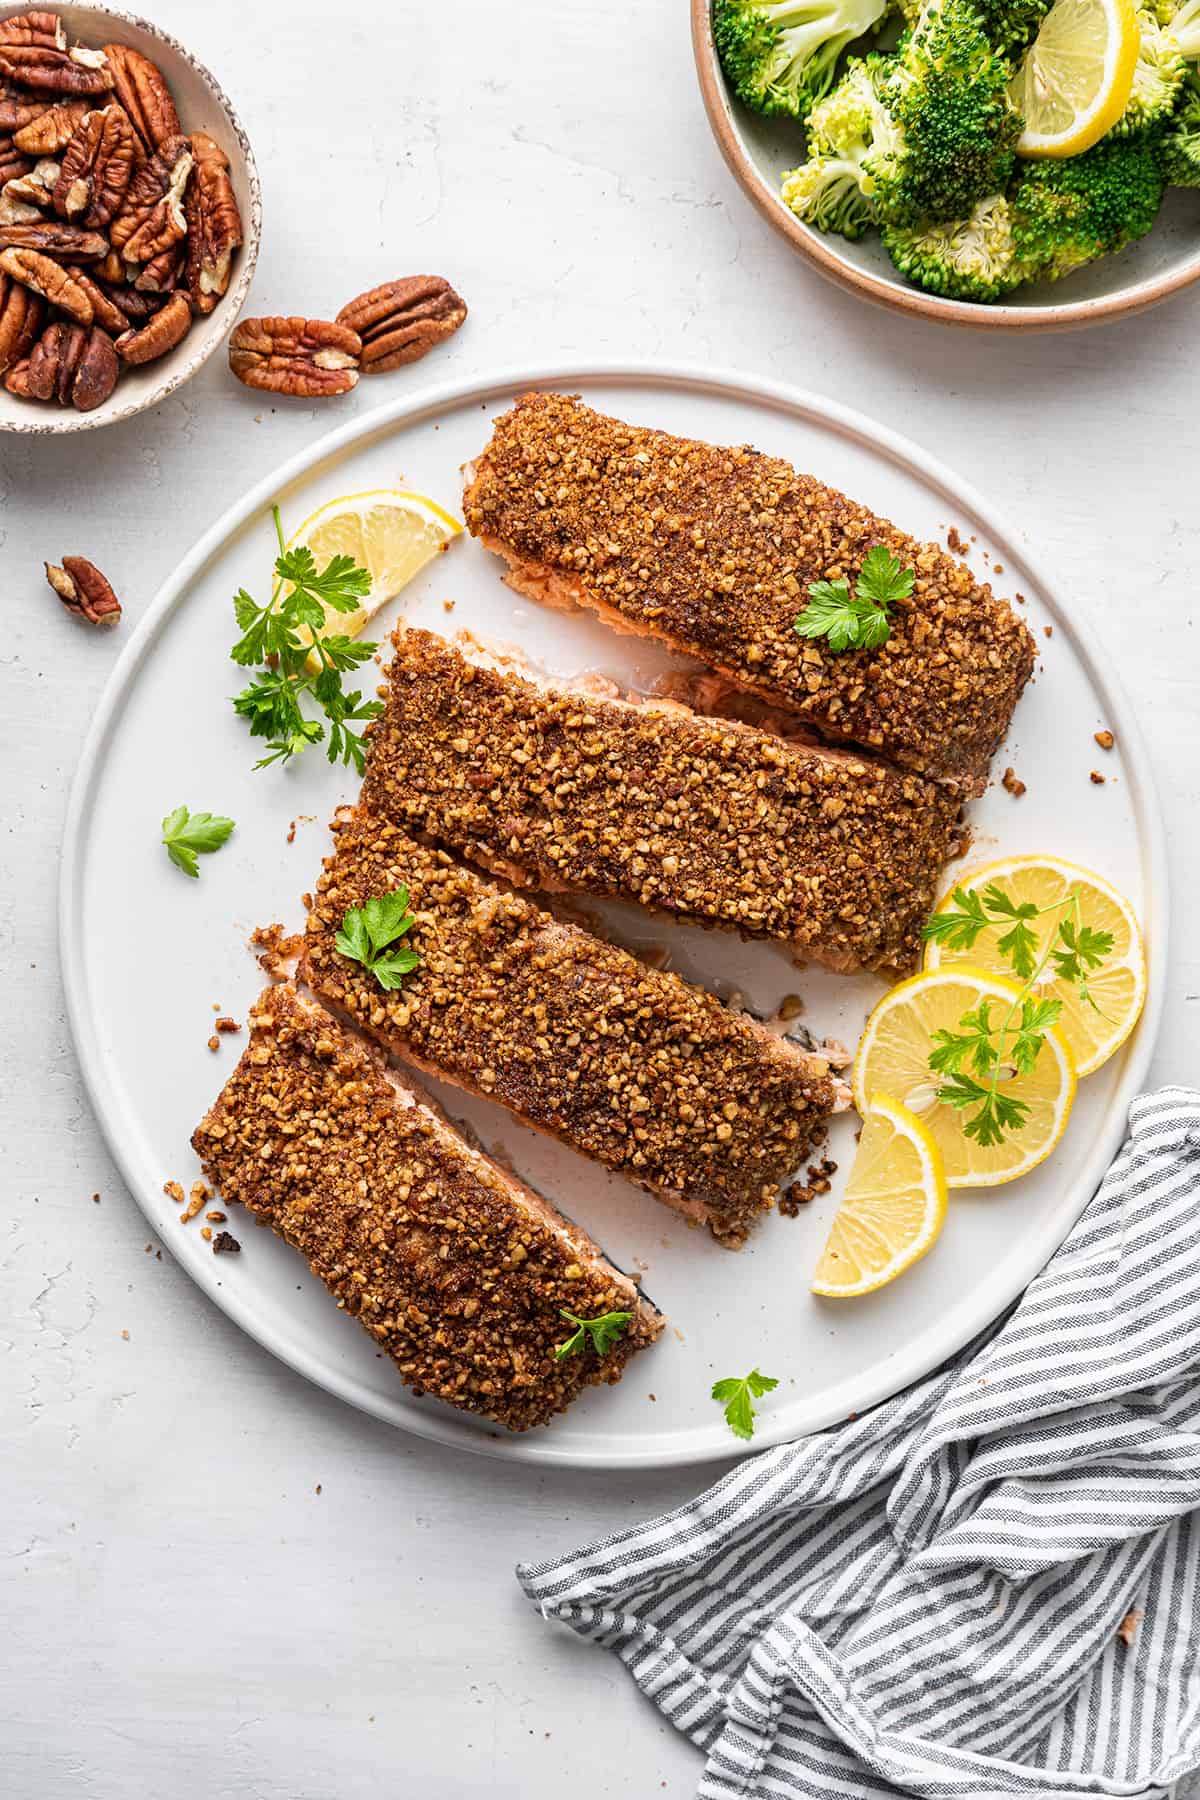 4 pieces of pecan crusted salmon on a plate with lemon slices